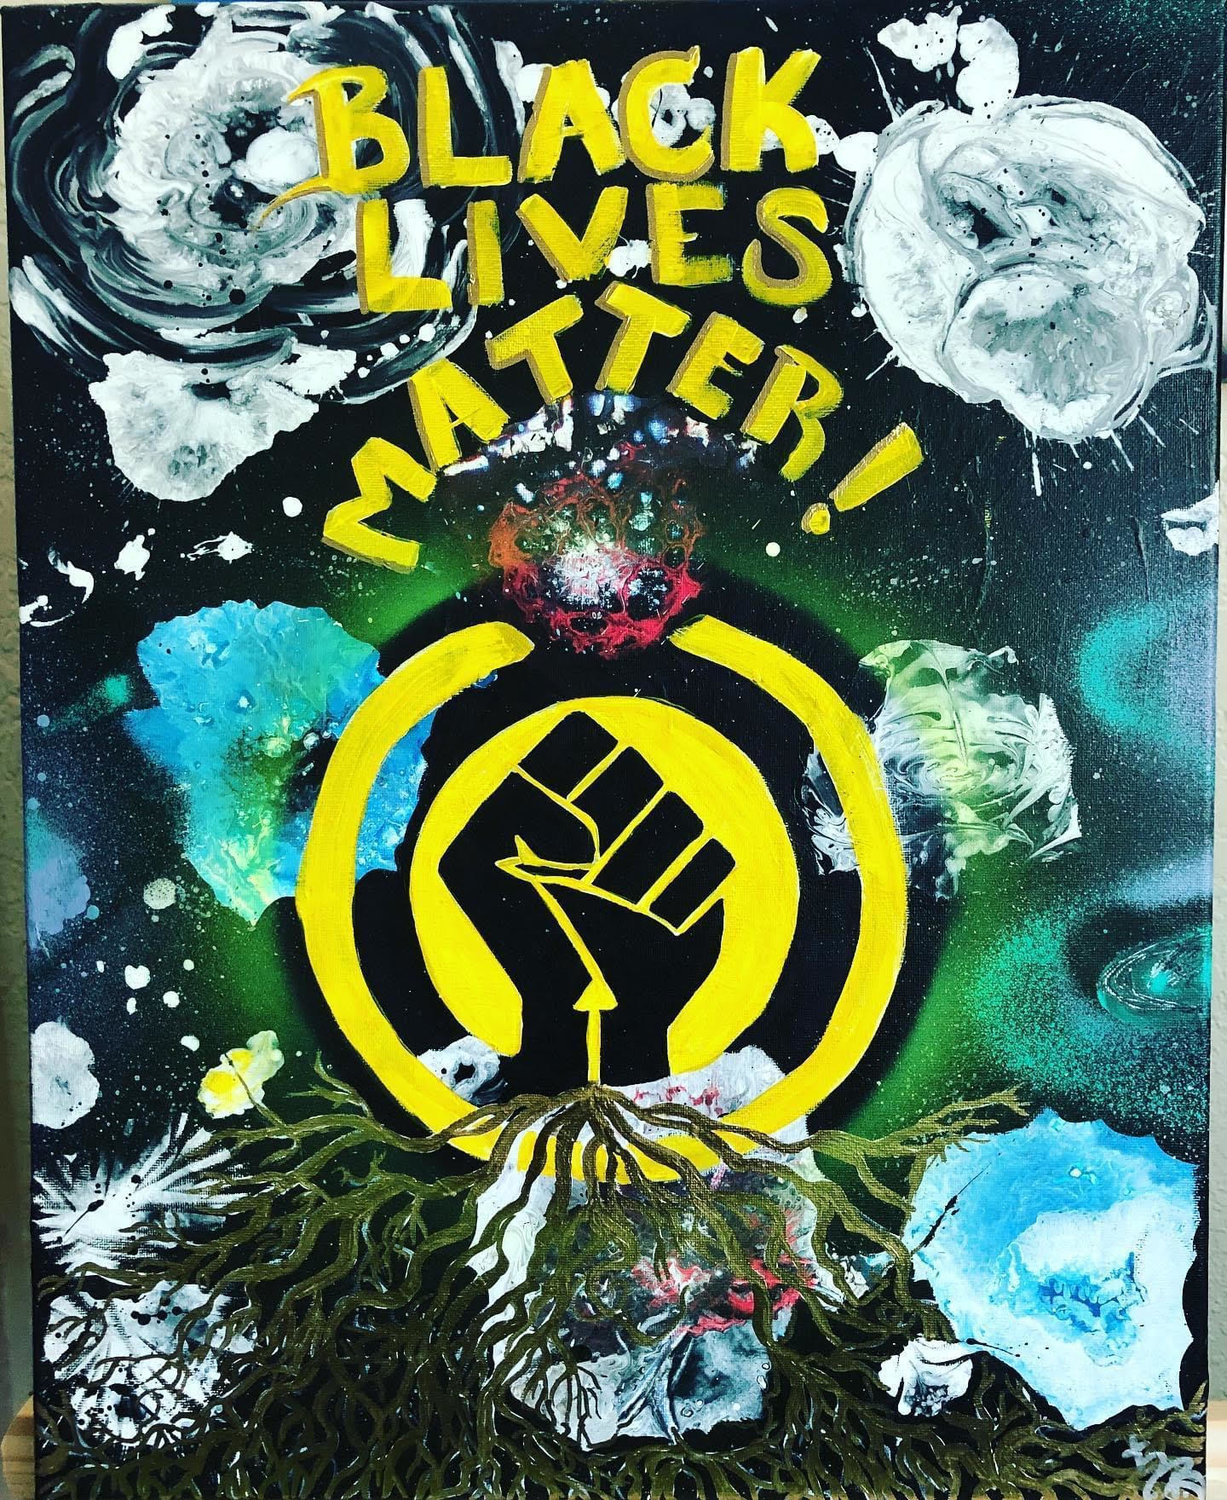 A painting inspired by Black Lives Matter by Tamara Brown.